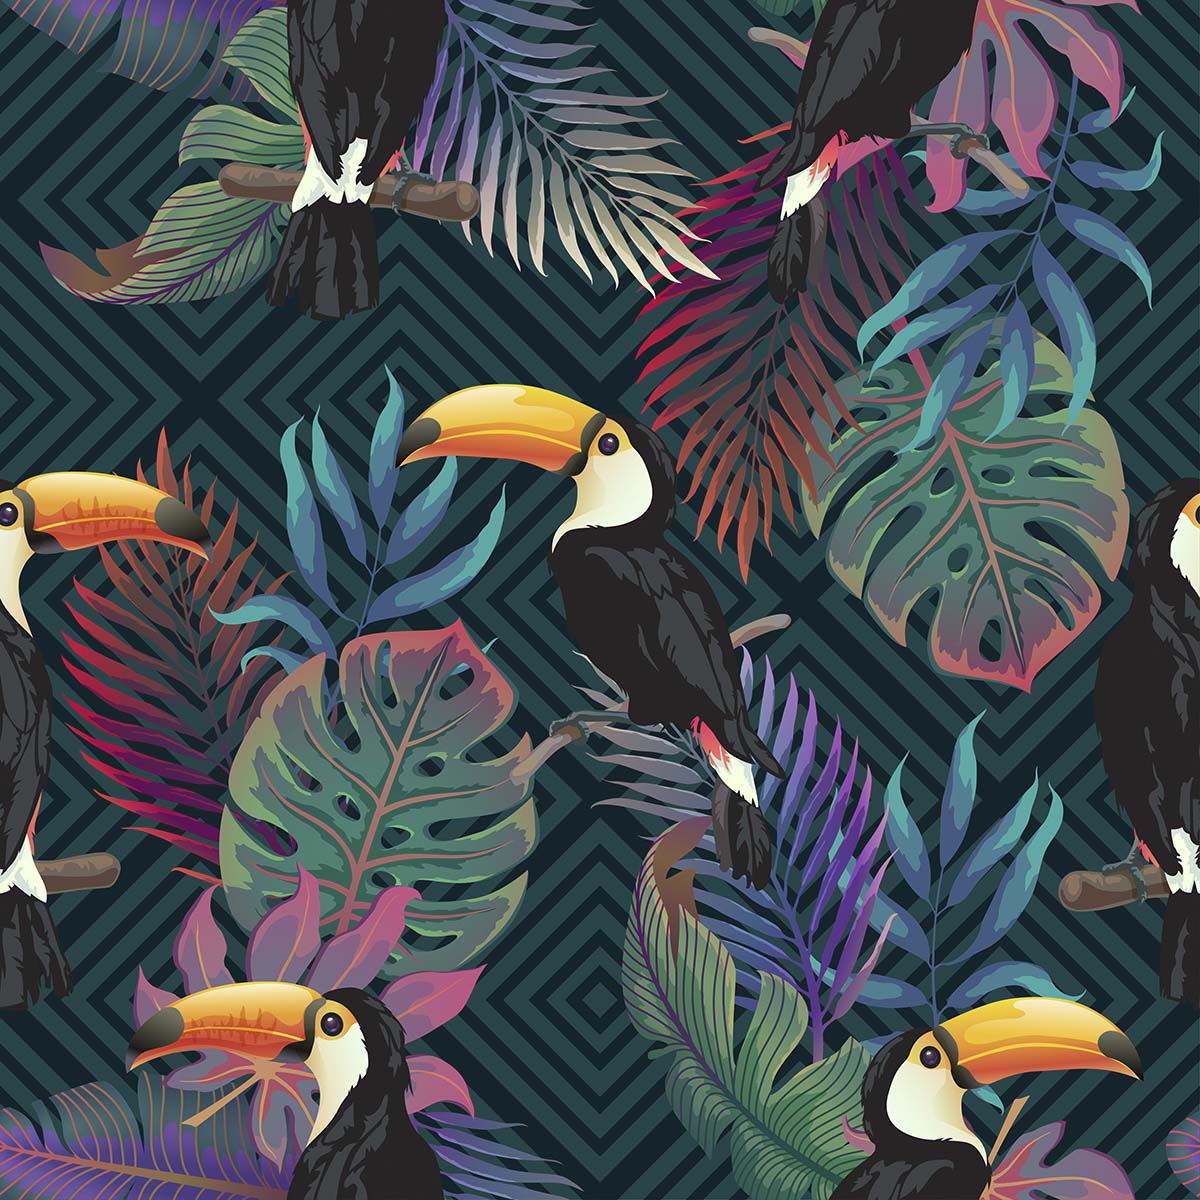 A pattern of birds and leaves